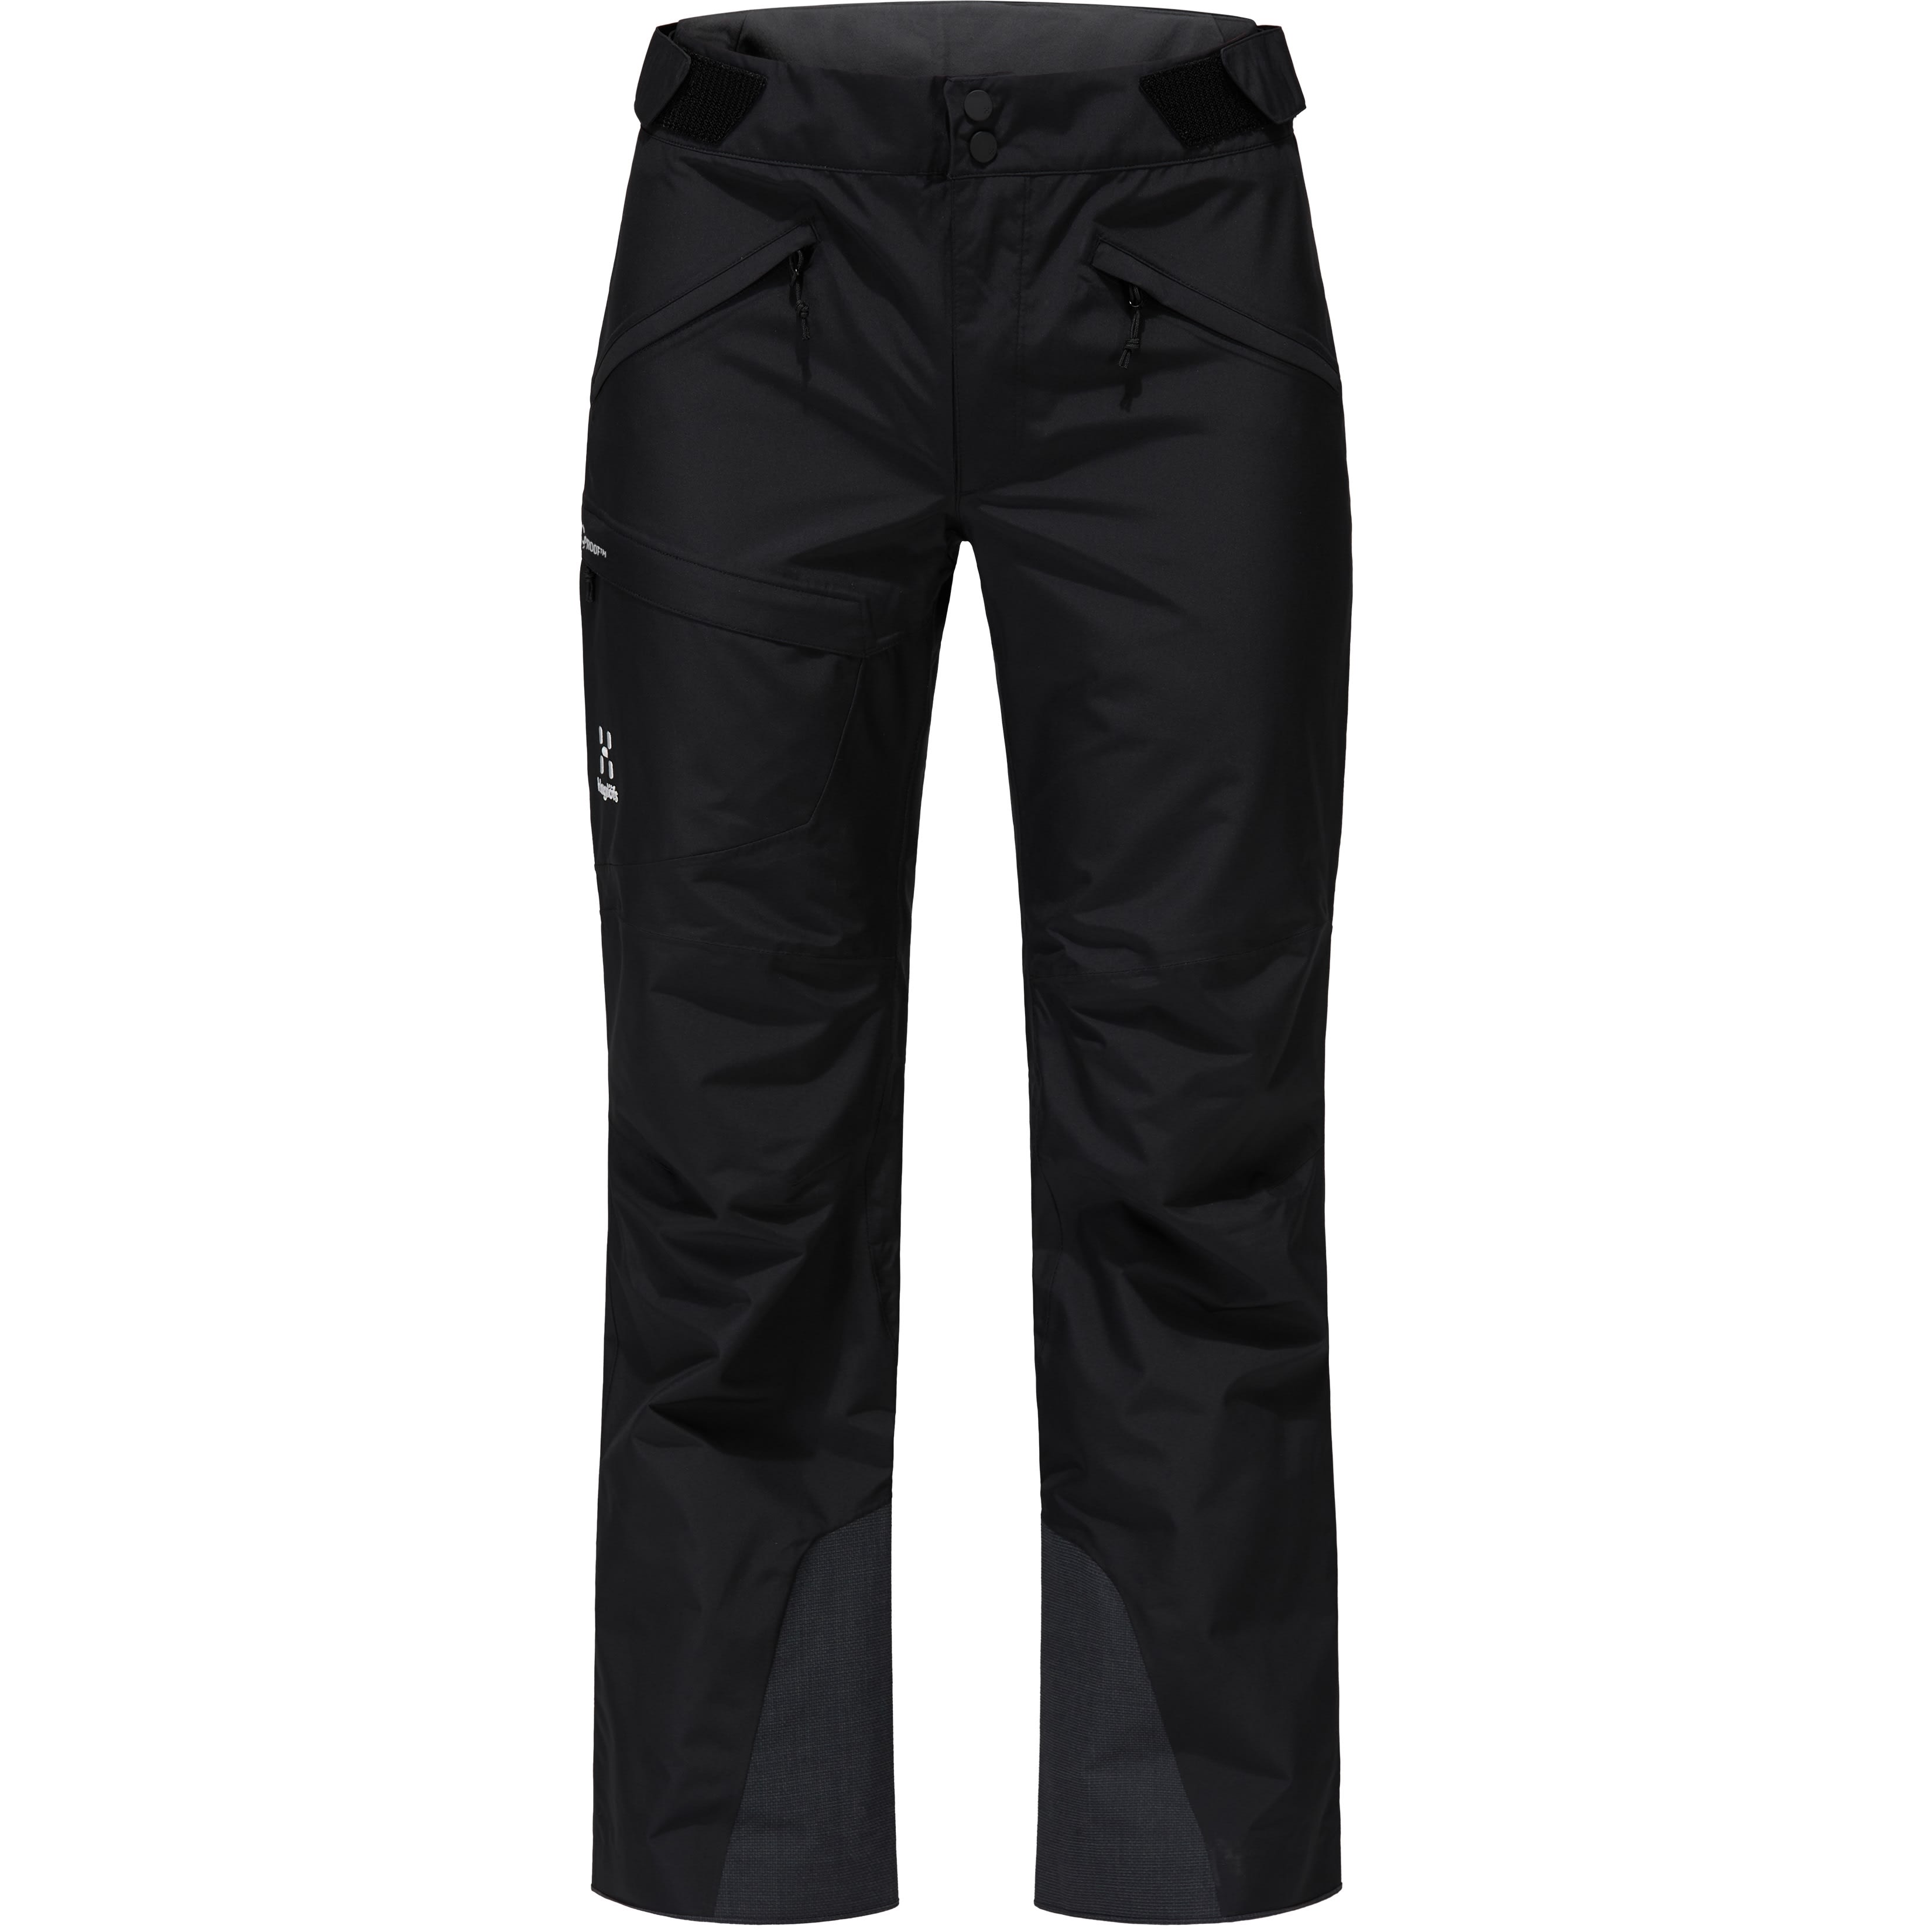 Buy Haglöfs Women's Lumi Form Pant (2022) from Outnorth